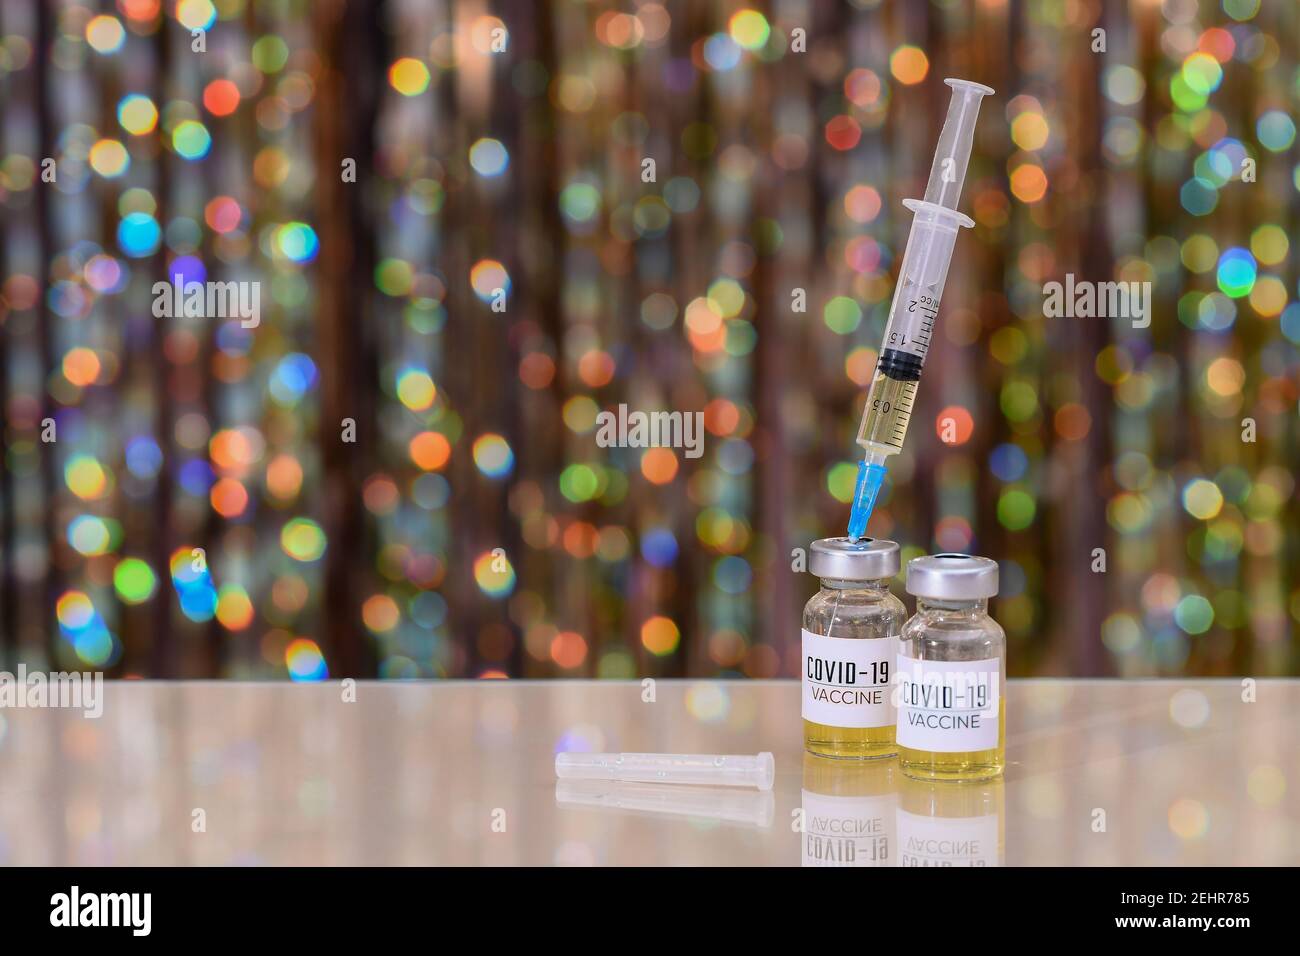 A bottle of of coronavirus vaccine. The syringe is inserted into a bottle with the covid-19 vaccine. On a shiny bokeh background.  Stock Photo